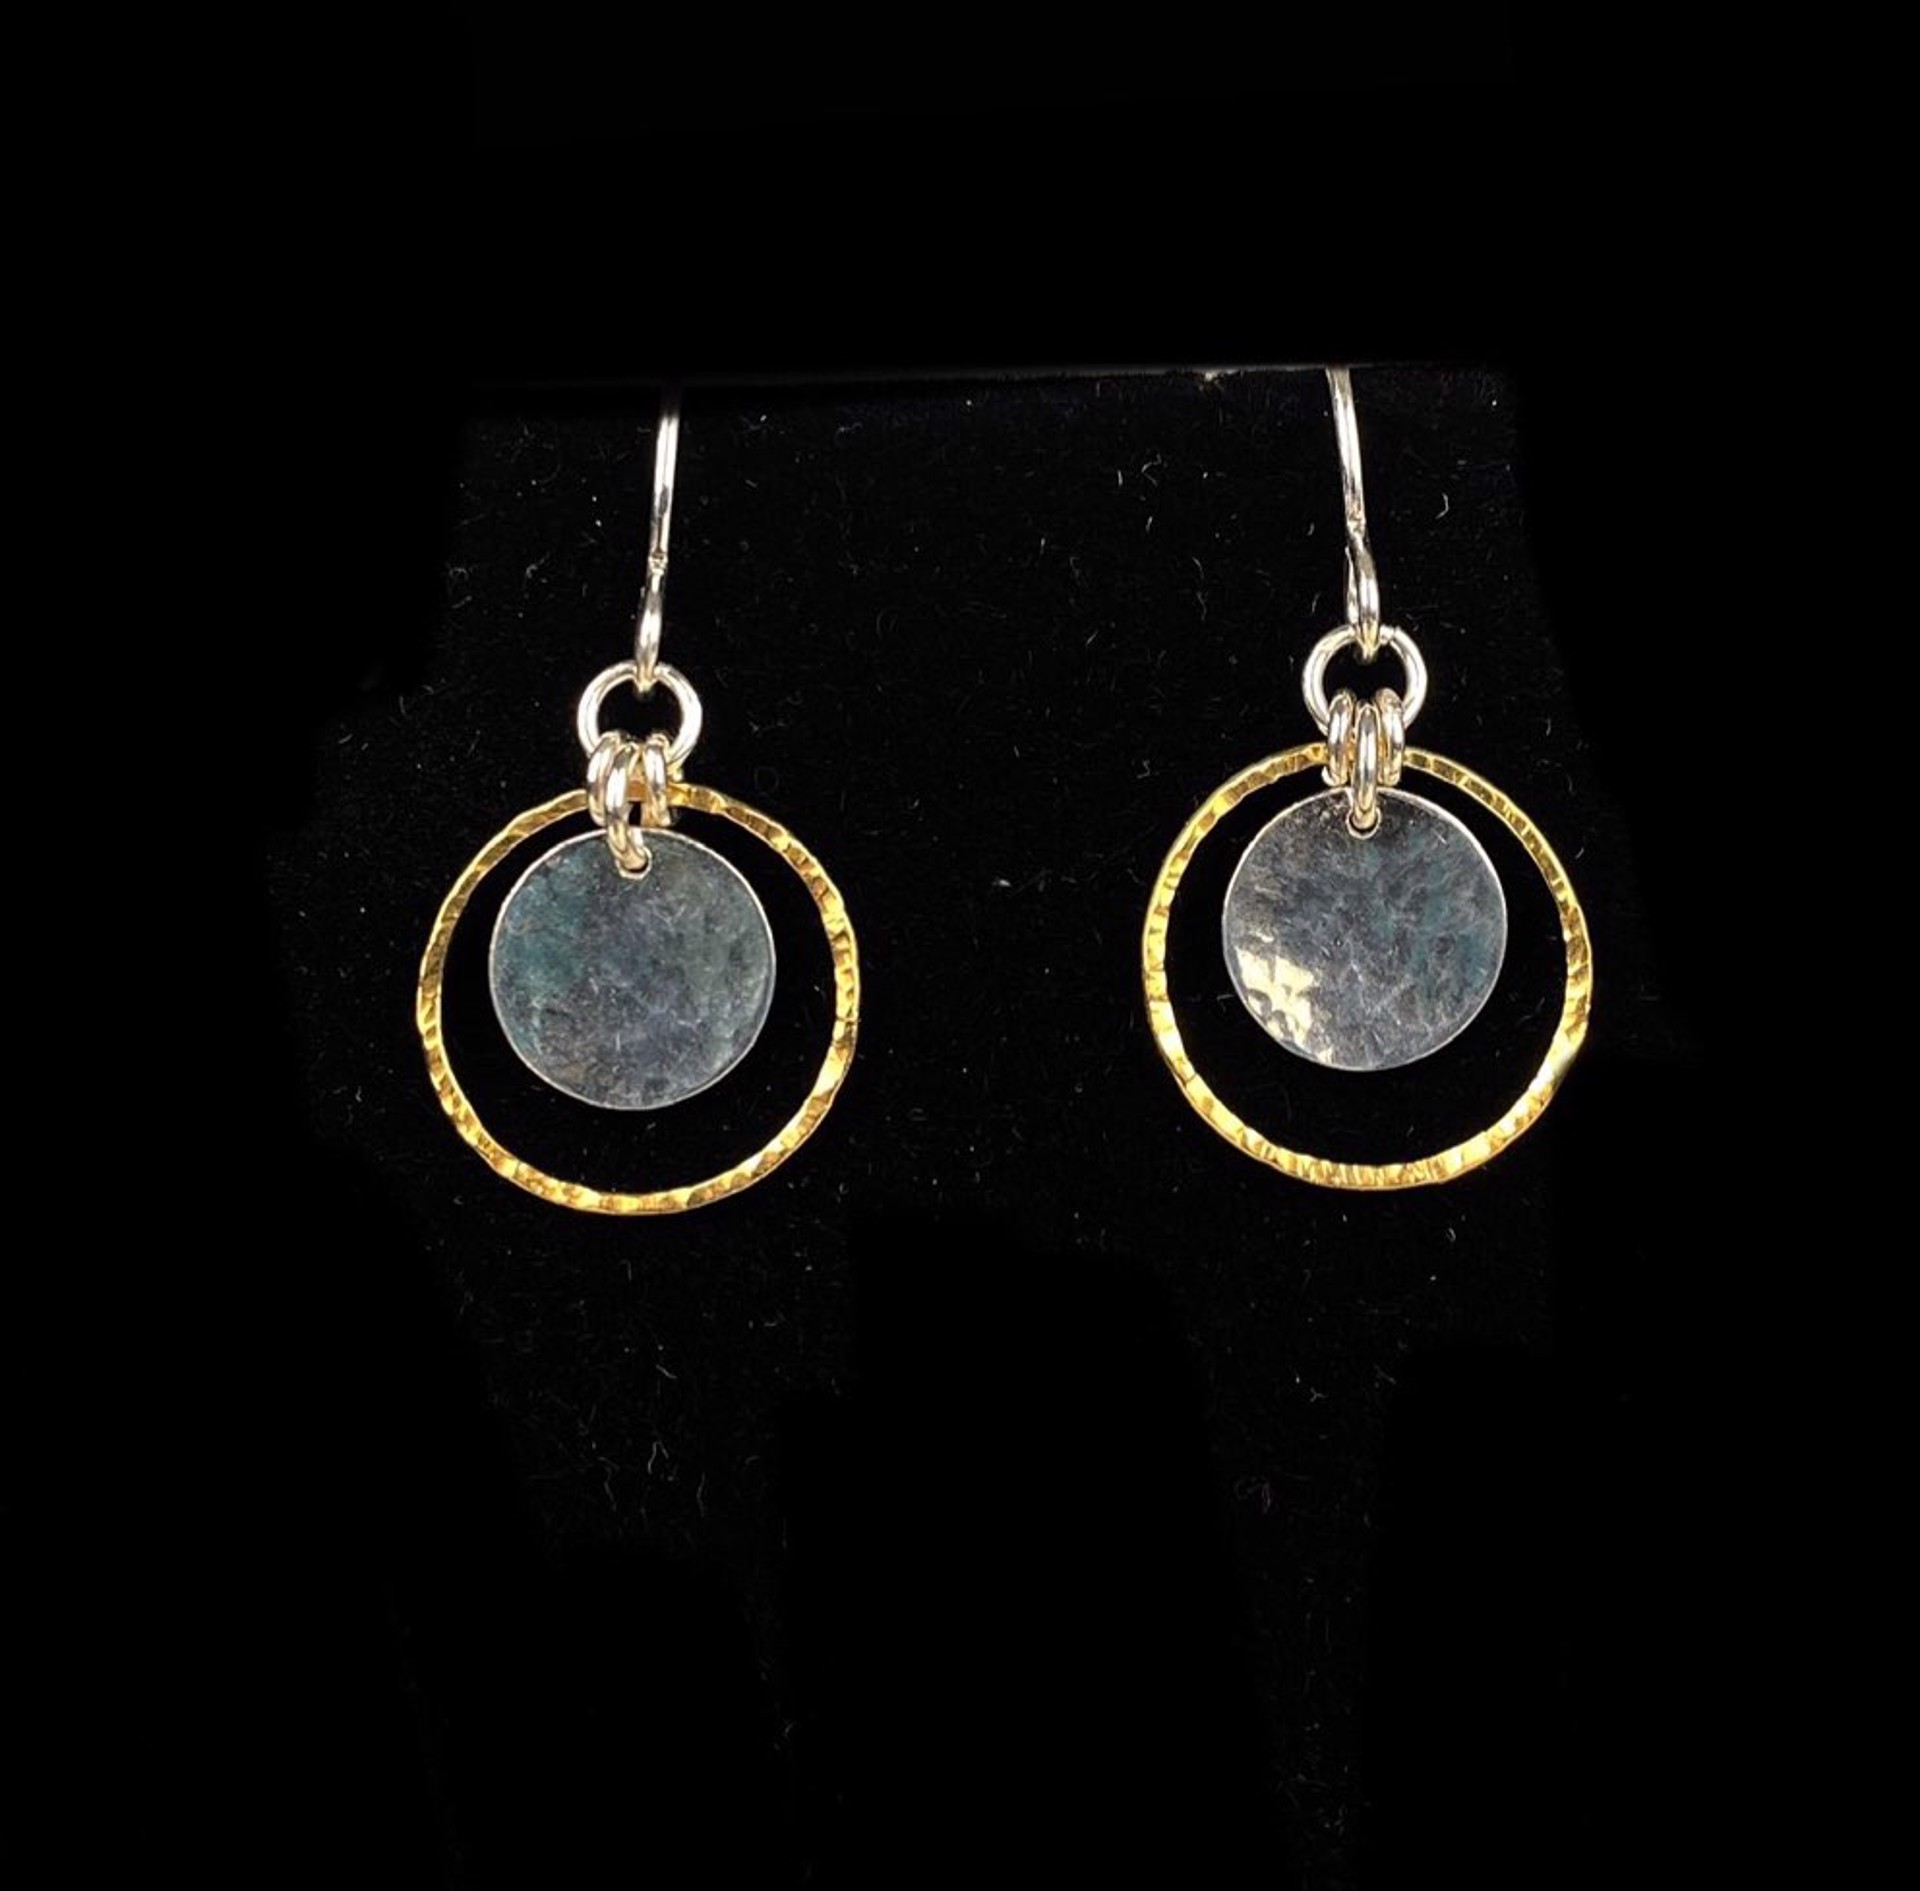 Vermeil Circle and Disk Earrings by Nichole Collins